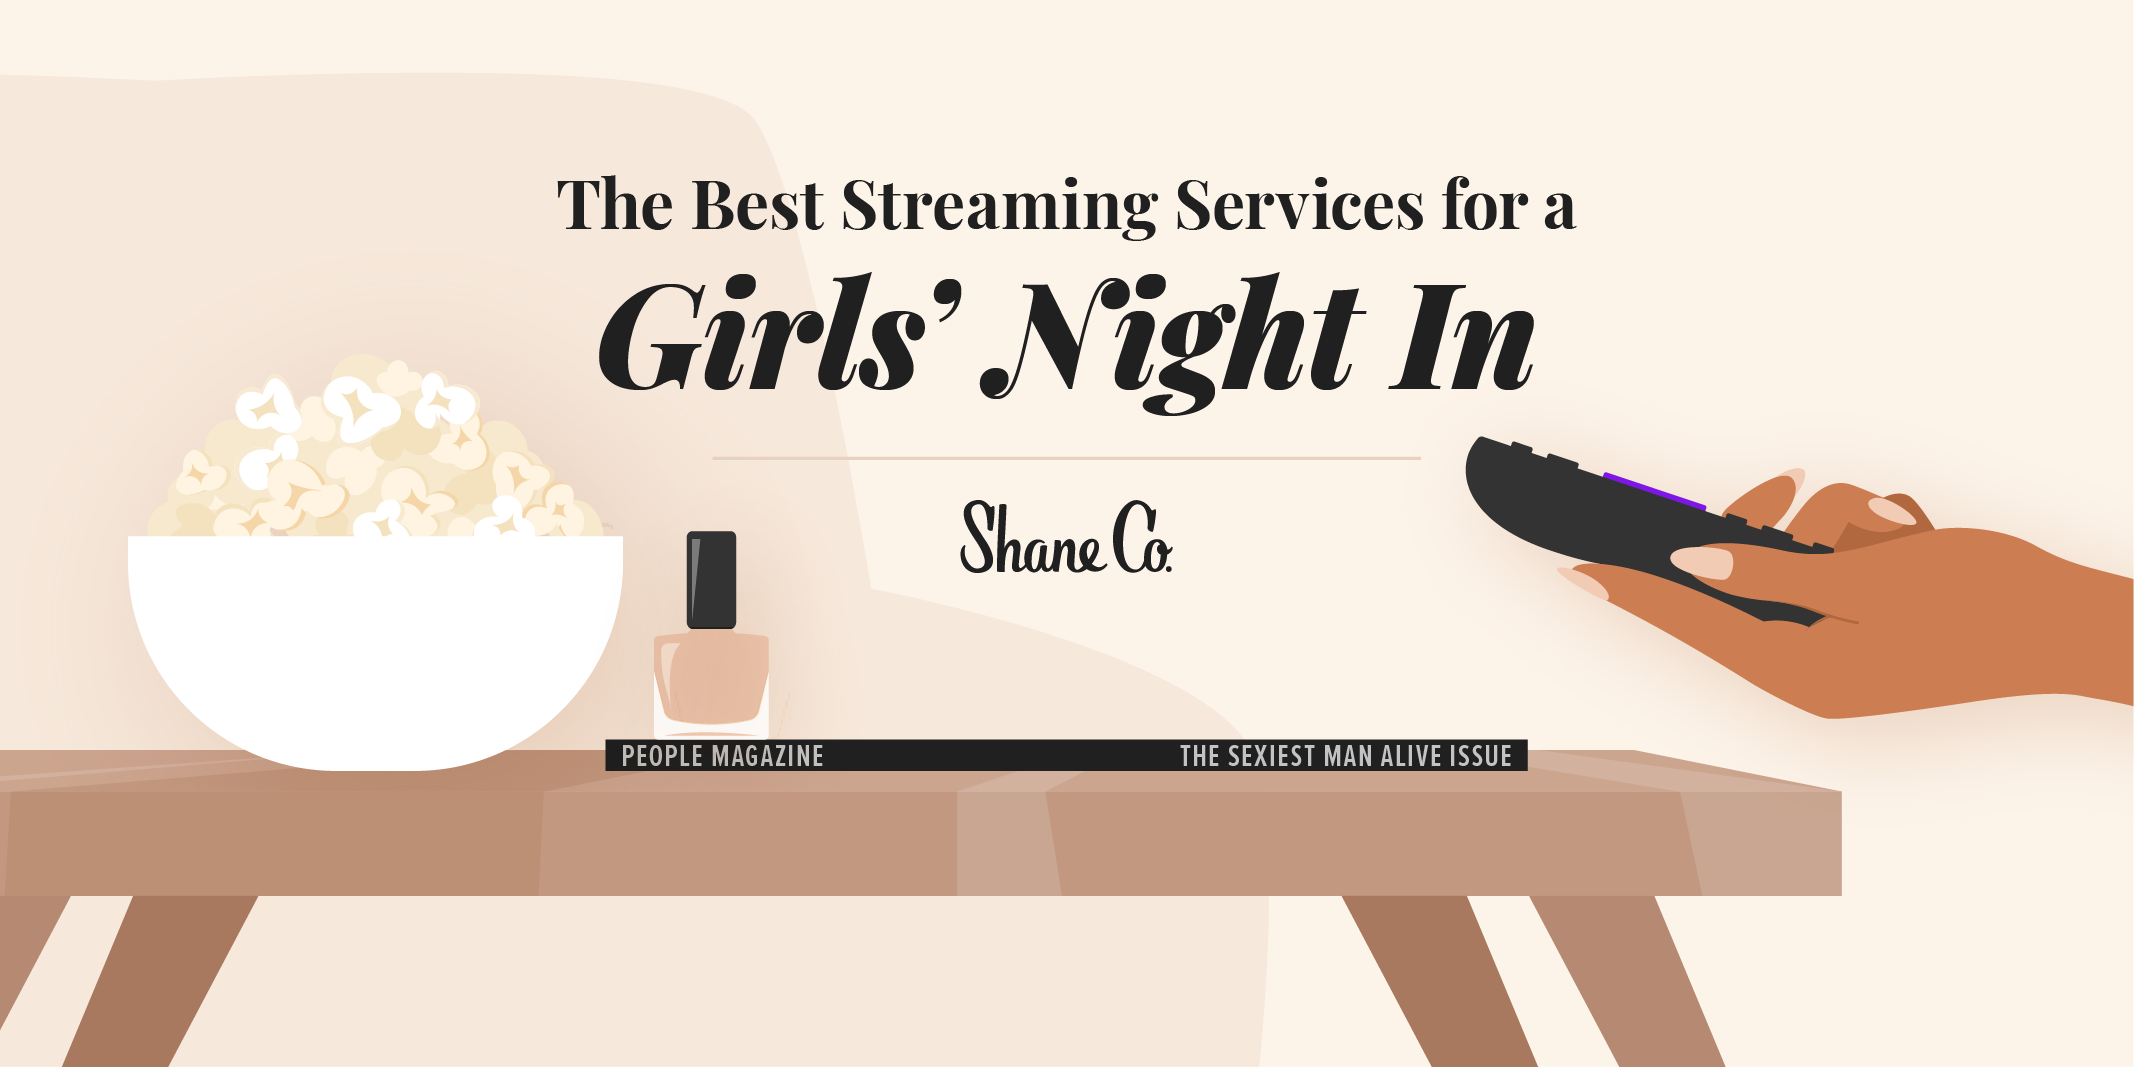 Introductory graphic for a blog about the best streaming services for a girls’ night in.